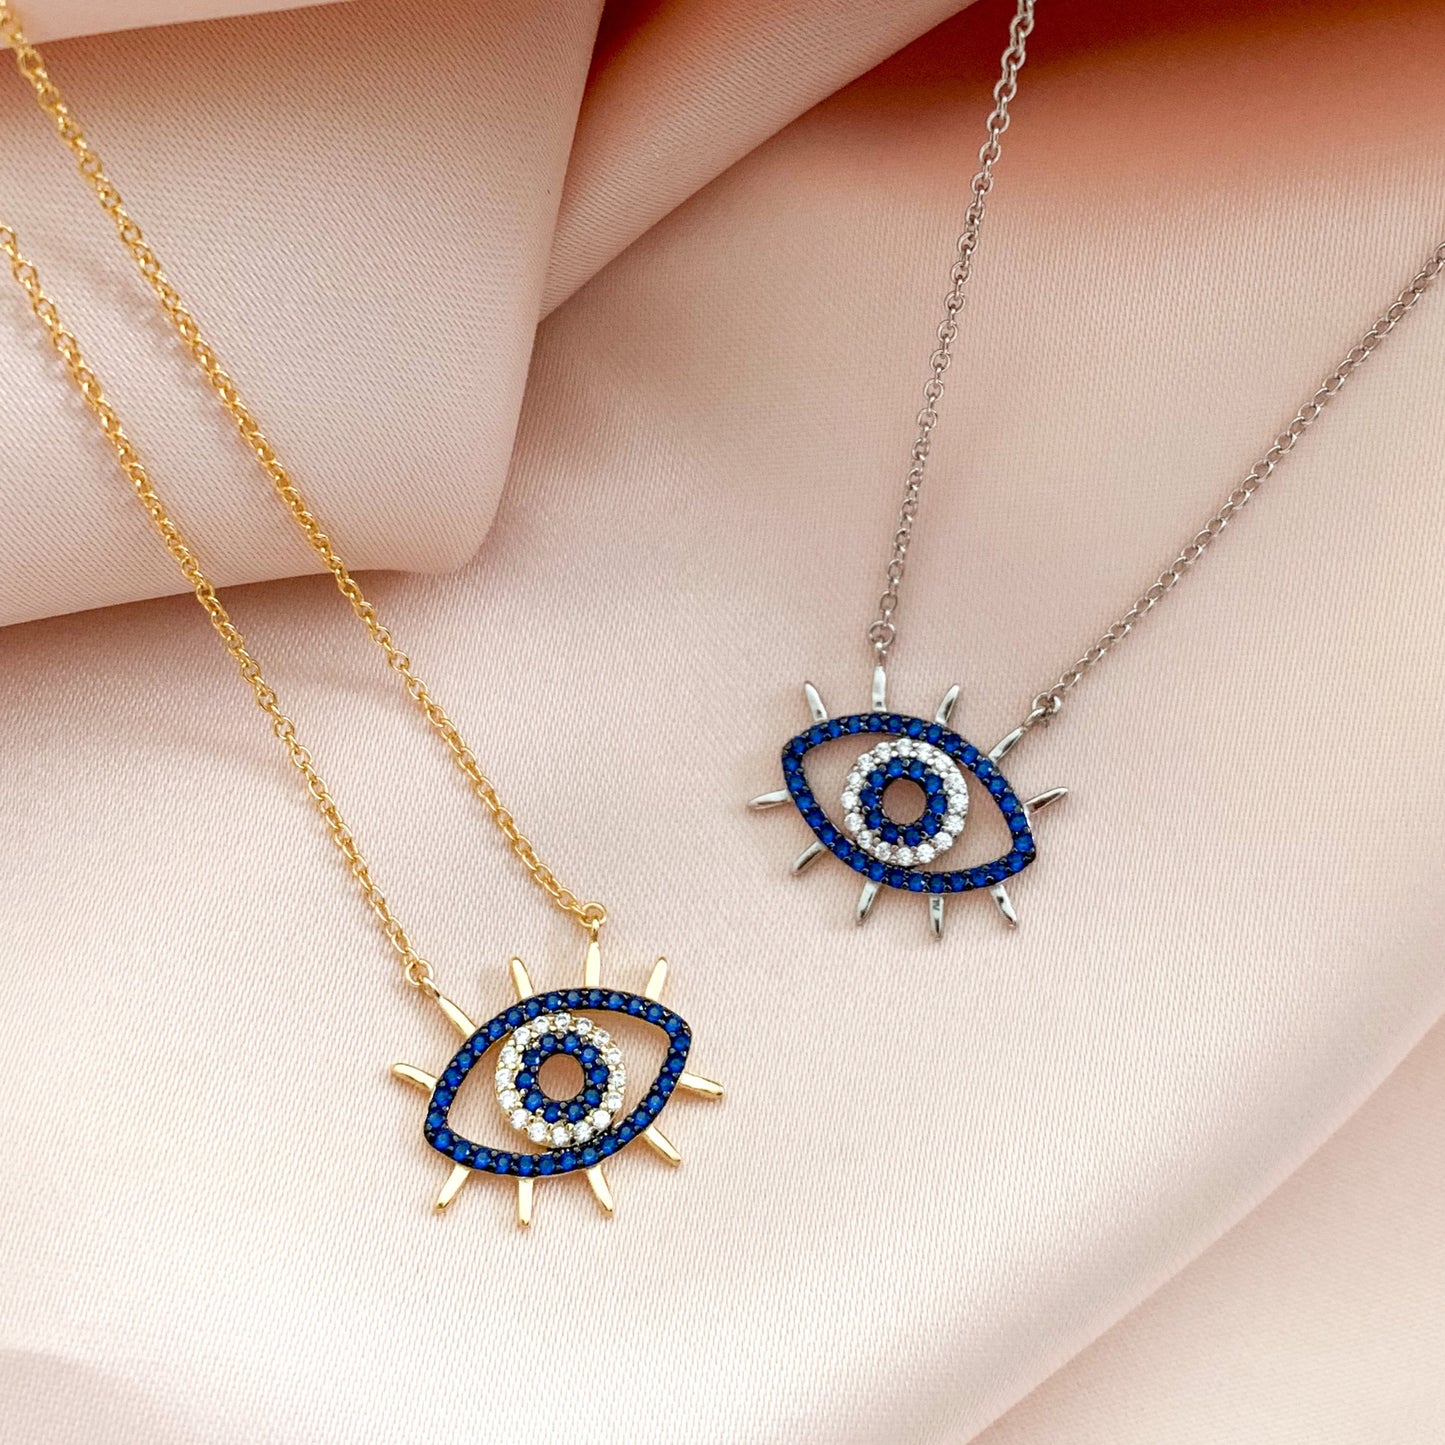 Alexandra Marks - Bold CZ Evil Eye Pendant Necklaces in Silver and Gold